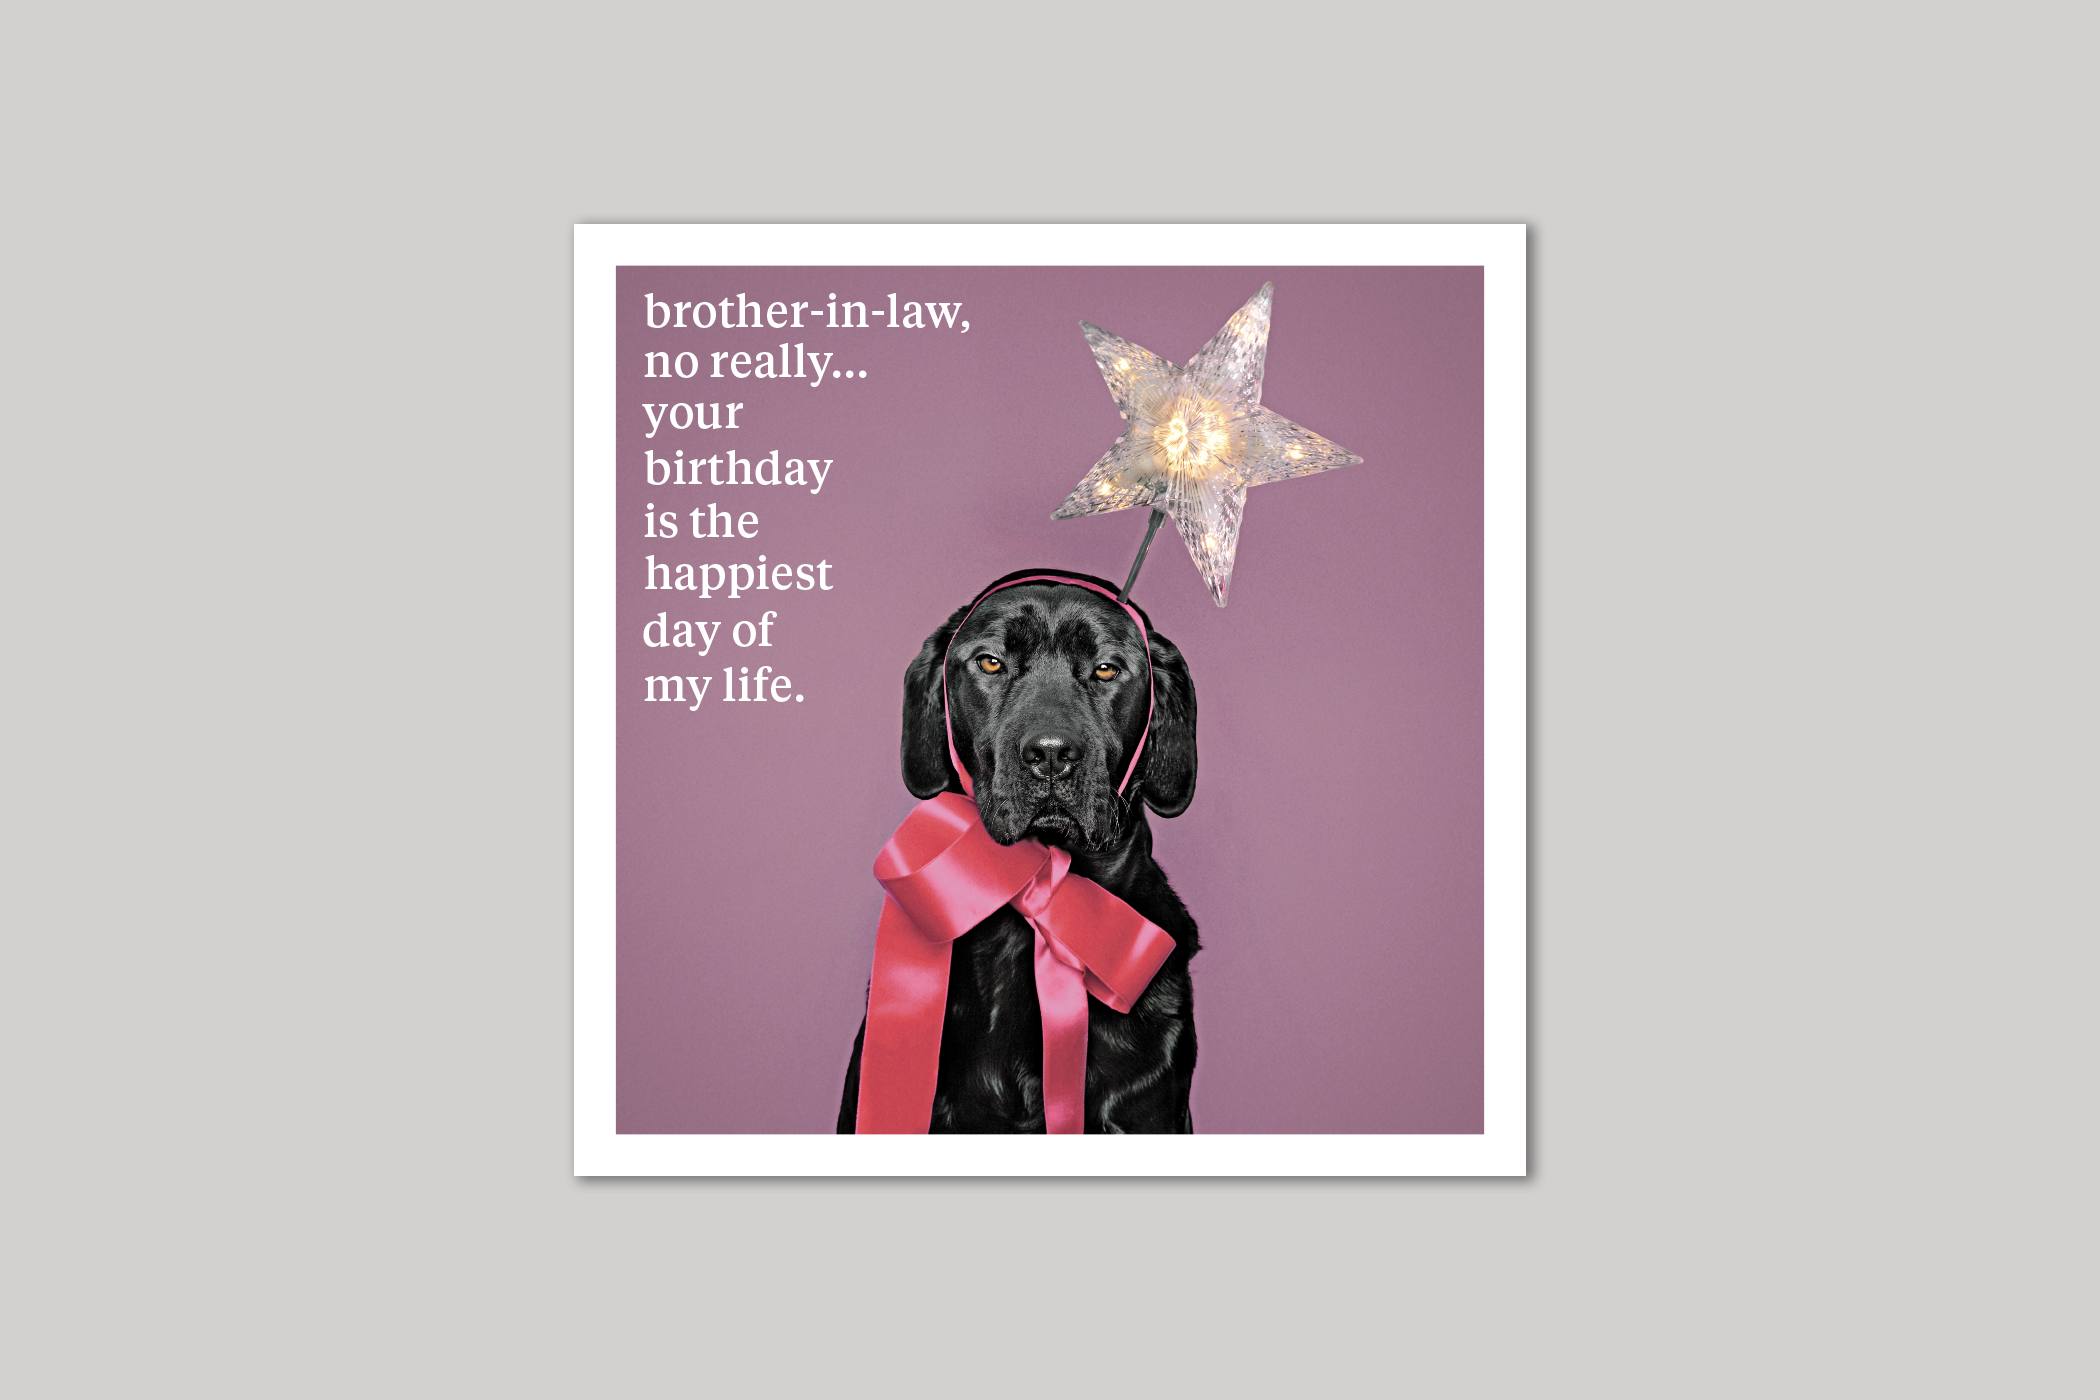 Your Birthday brother-in-law card quirky animal portrait from Curious World range of greeting cards by Icon.